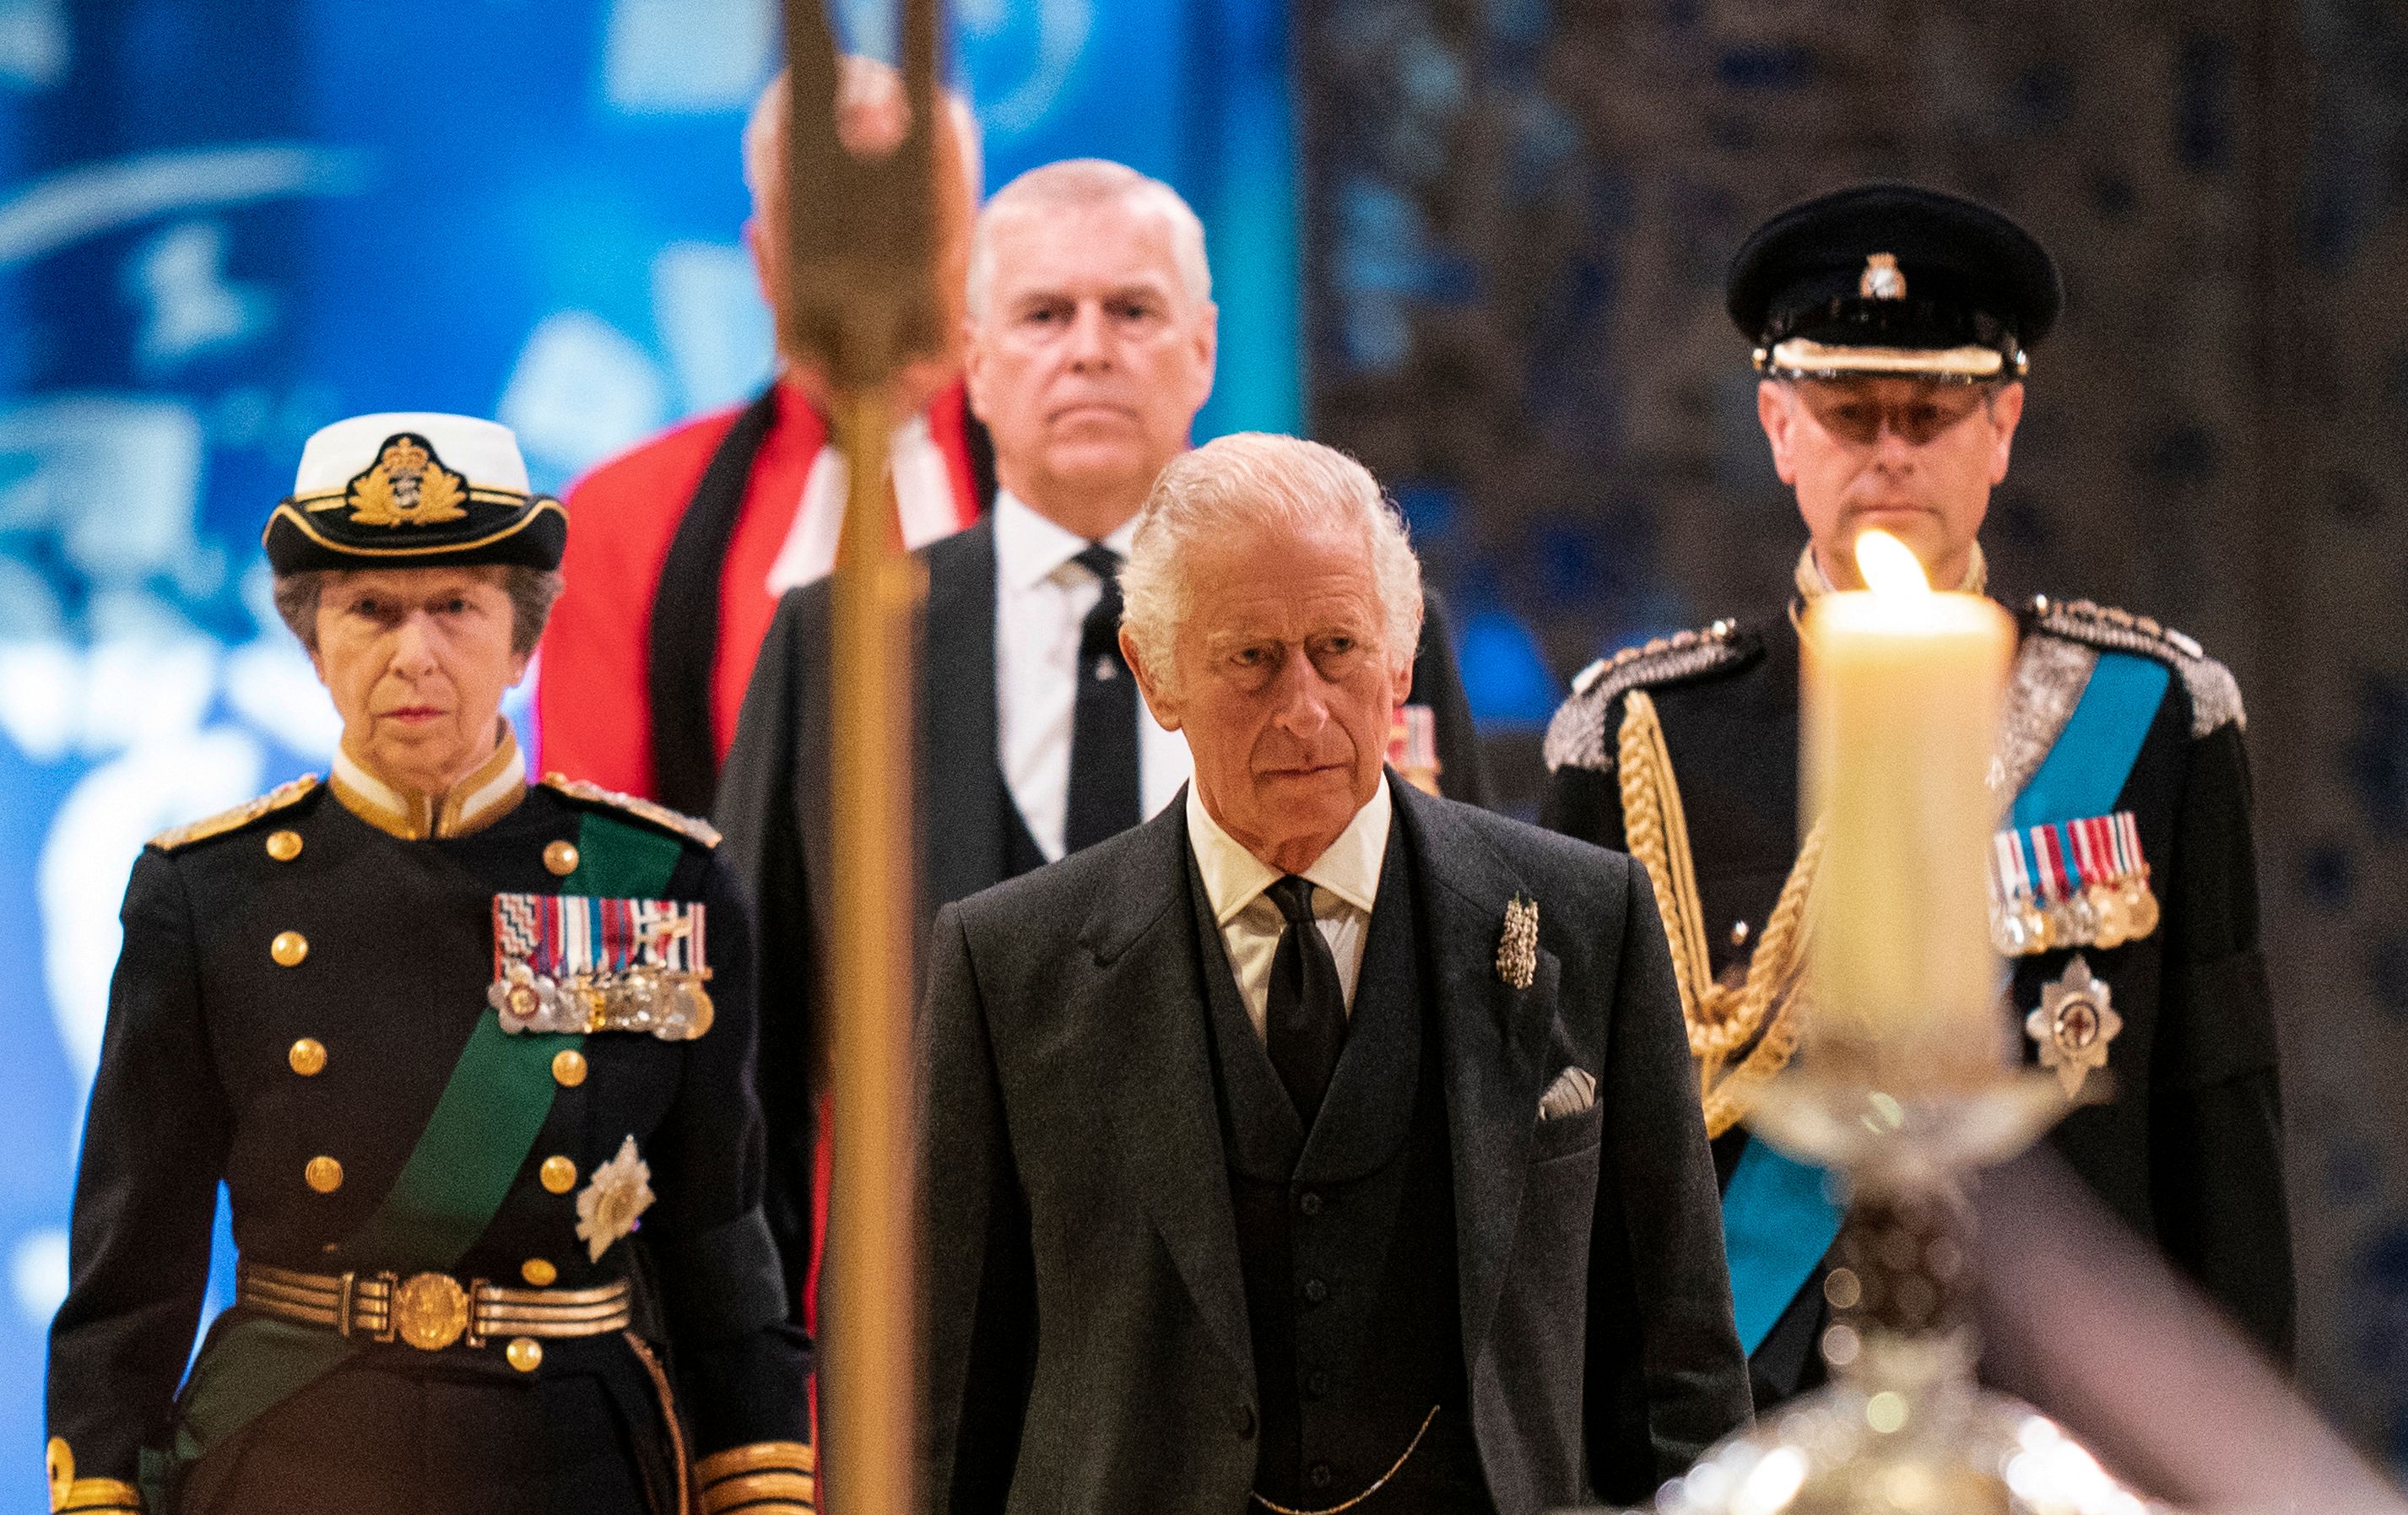 <p>Britain's King Charles III, Princess Anne, Prince Andrew and Prince Edward arrived to attend the Vigil of the Princes at St. Giles' Cathedral in Edinburgh, Scotland, on Sept. 12, 2022, following the death of their mother, Queen Elizabeth II, on Sept. 8. The foursome stood on all four sides of the queen's casket for 10 minutes alongside members of the Royal Company of Archers, who were there to guard the queen's body through the night, as thousands of mourners filed past to pay their respects.</p>